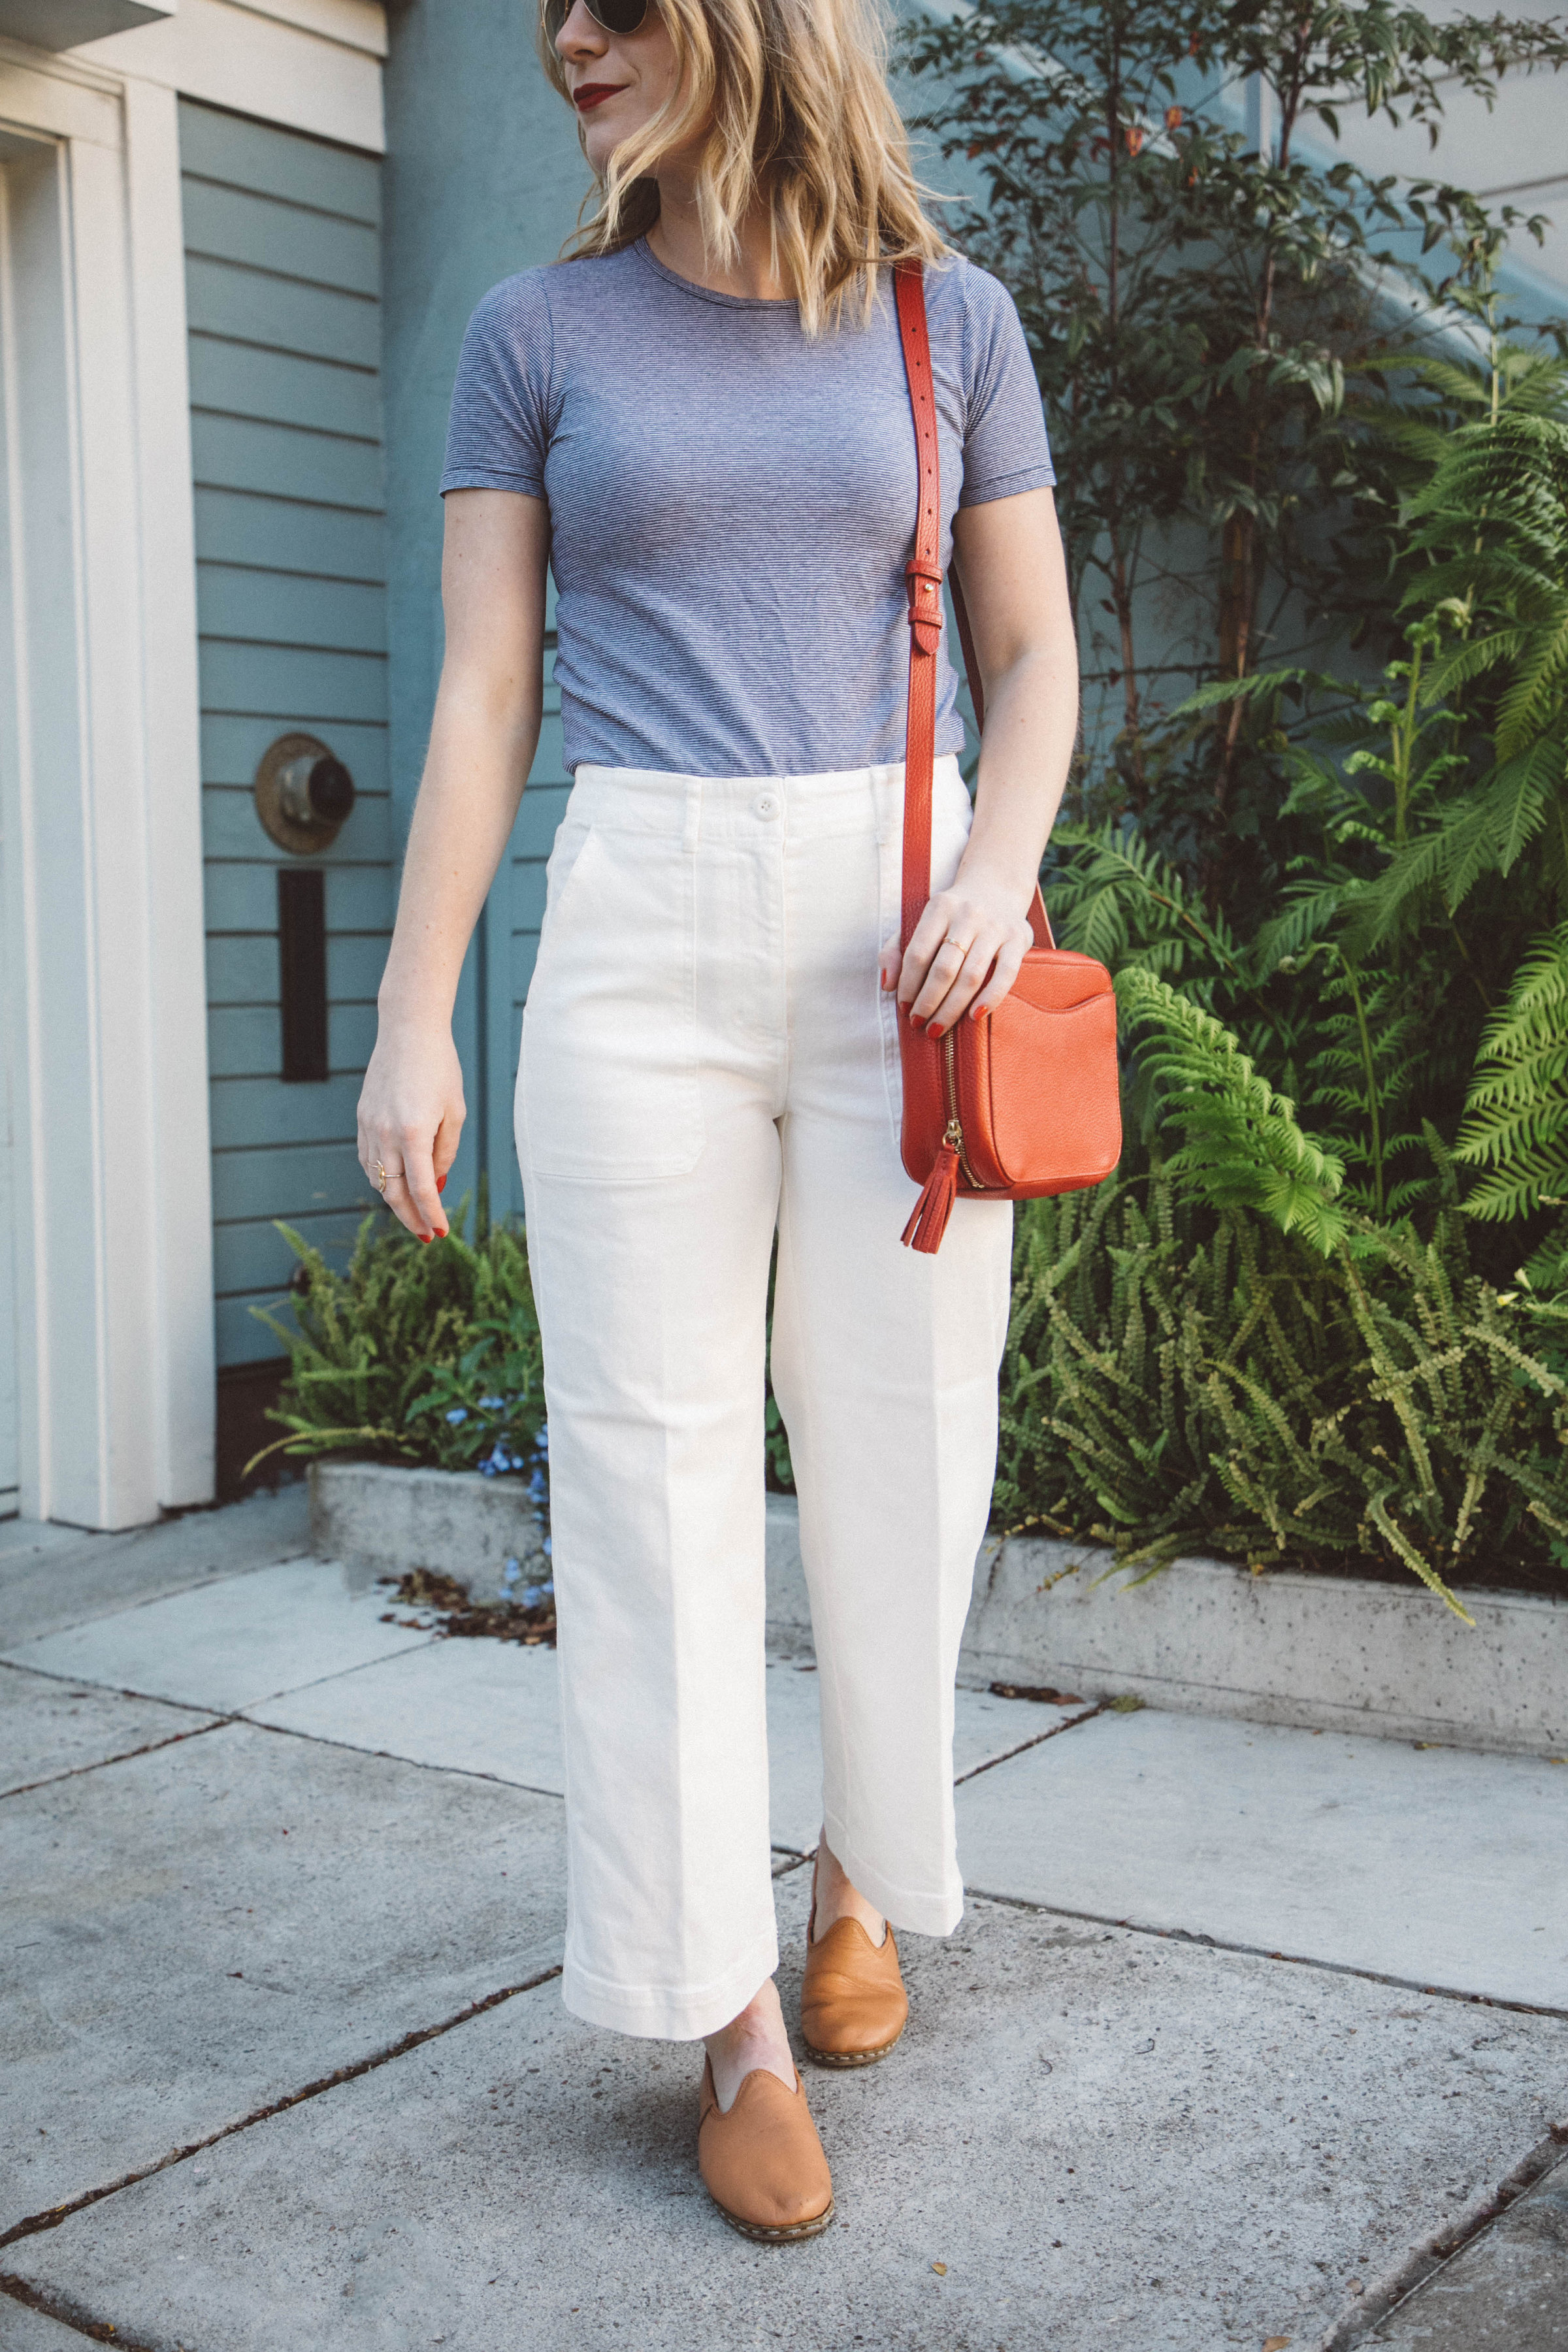 Everlane Wide Leg Crop Pants paired with an Everlane Striped Tee makes for the perfect early summer look.